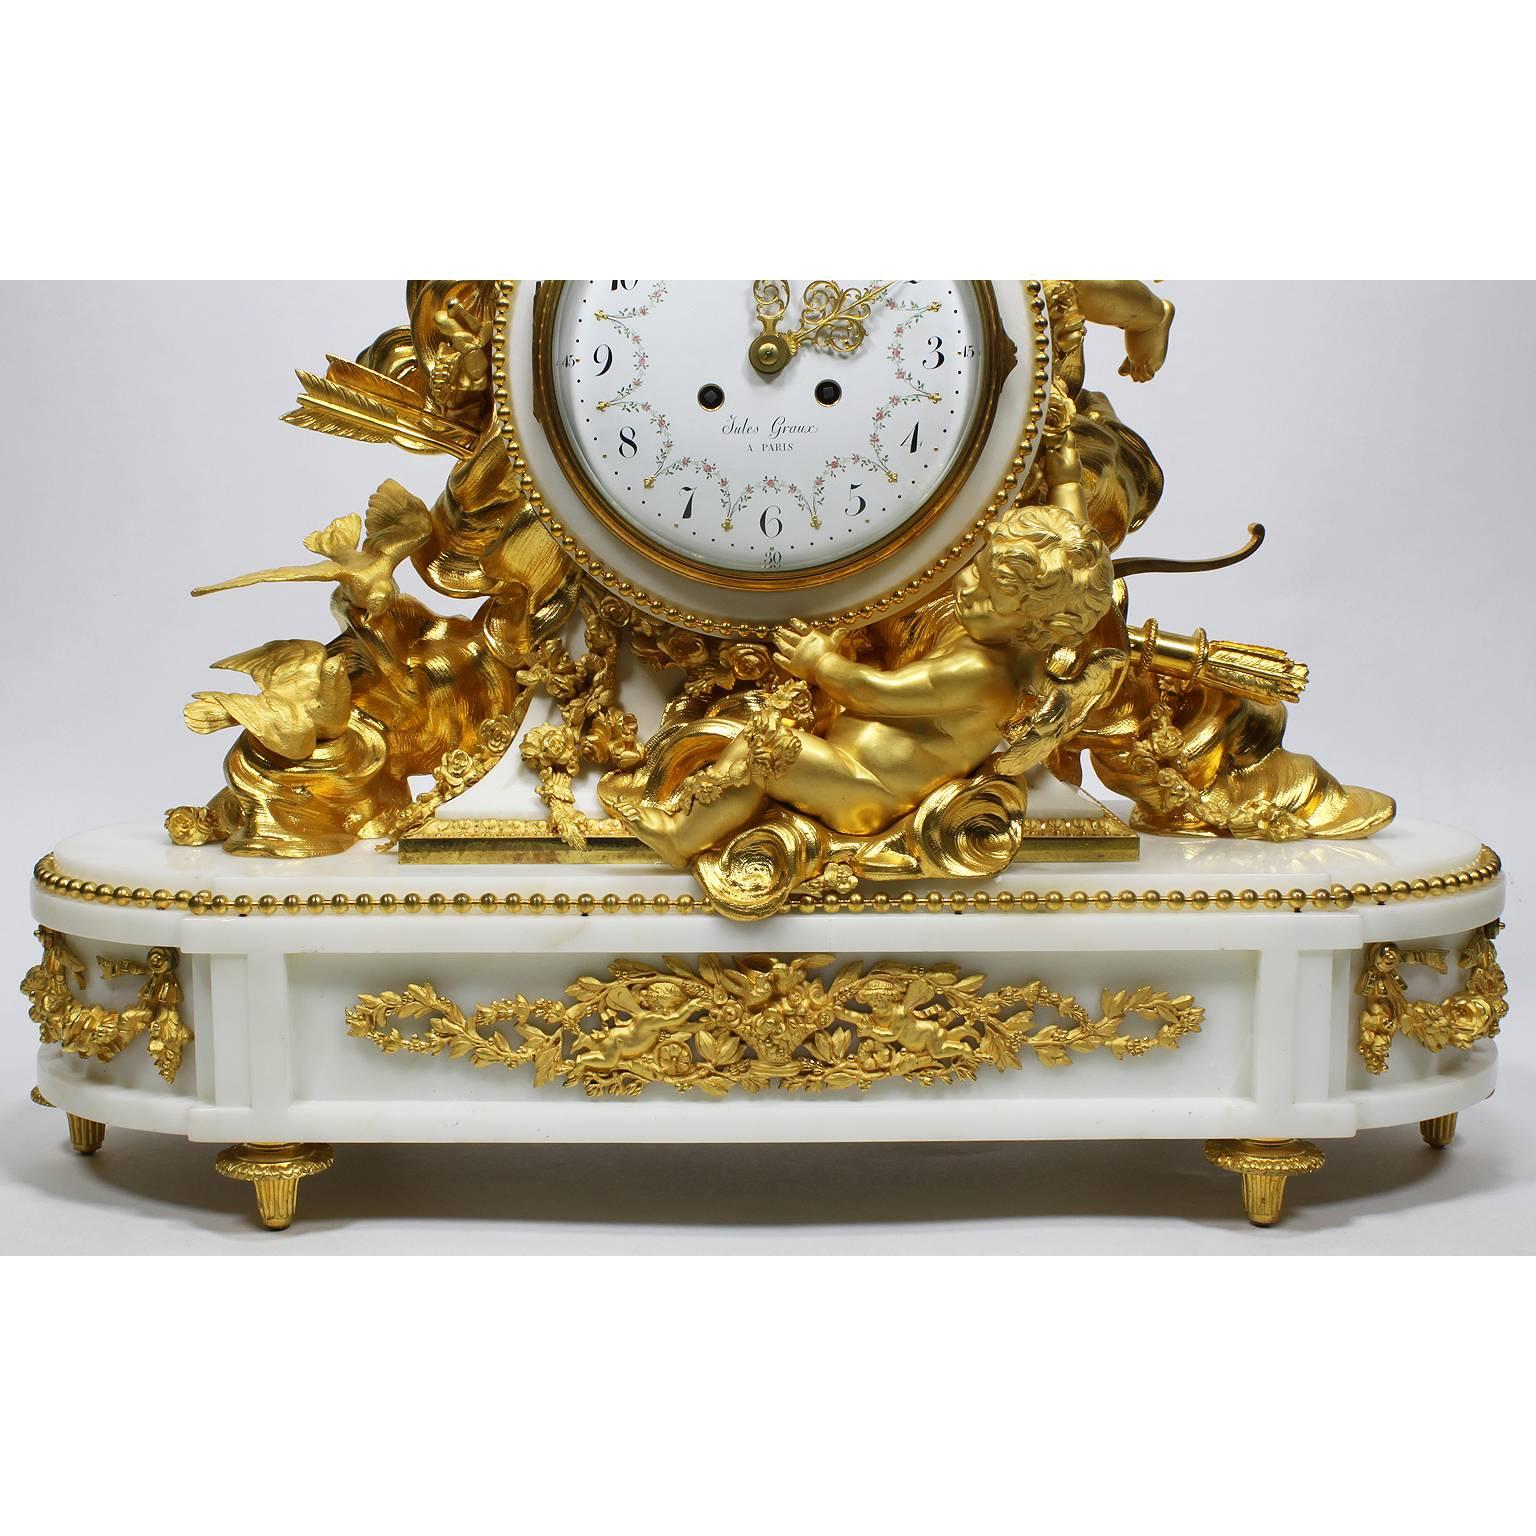 Marble Palatial 19th Century Louis XV Style Ormolu Mantel Clock, Beurdeley Attributed